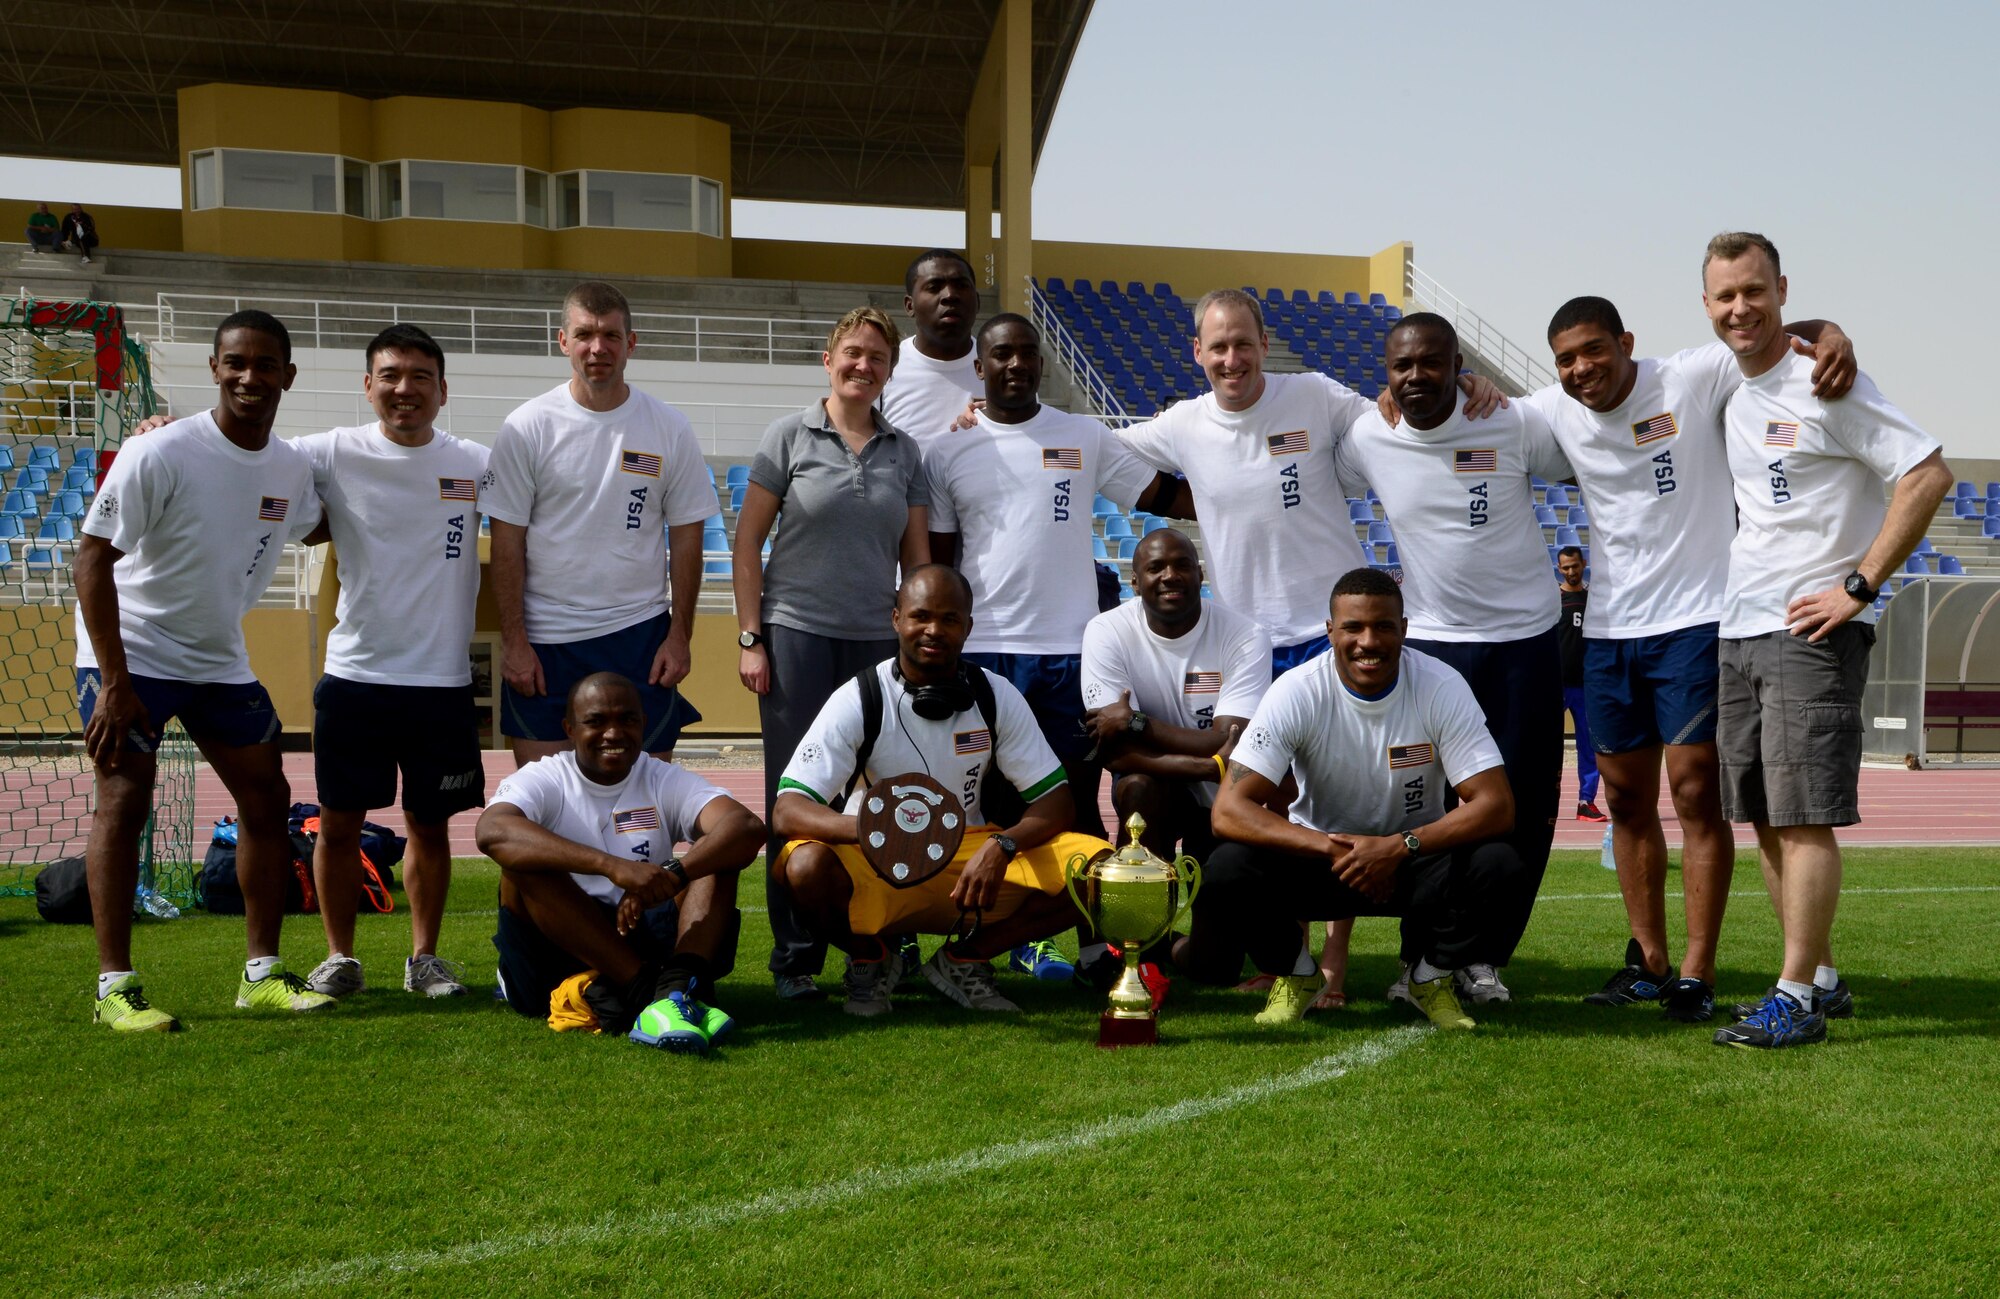 U.S. servicemembers, who participated in Qatar National Sports Day, gathered for a team photo after competing in a soccer game, Feb. 10, 2015, at Al Udeid Air Base, Qatar. The Qatar National Sports Day is an initiative adopted in 2011 by the current Emir, Sheikh Tamim bin Hamad Al Thani, to further embed sporting values into the nation's culture and inspire people to be healthy and engage in physical activities. (U.S. Air Force photo by Senior Airman Kia Atkins)